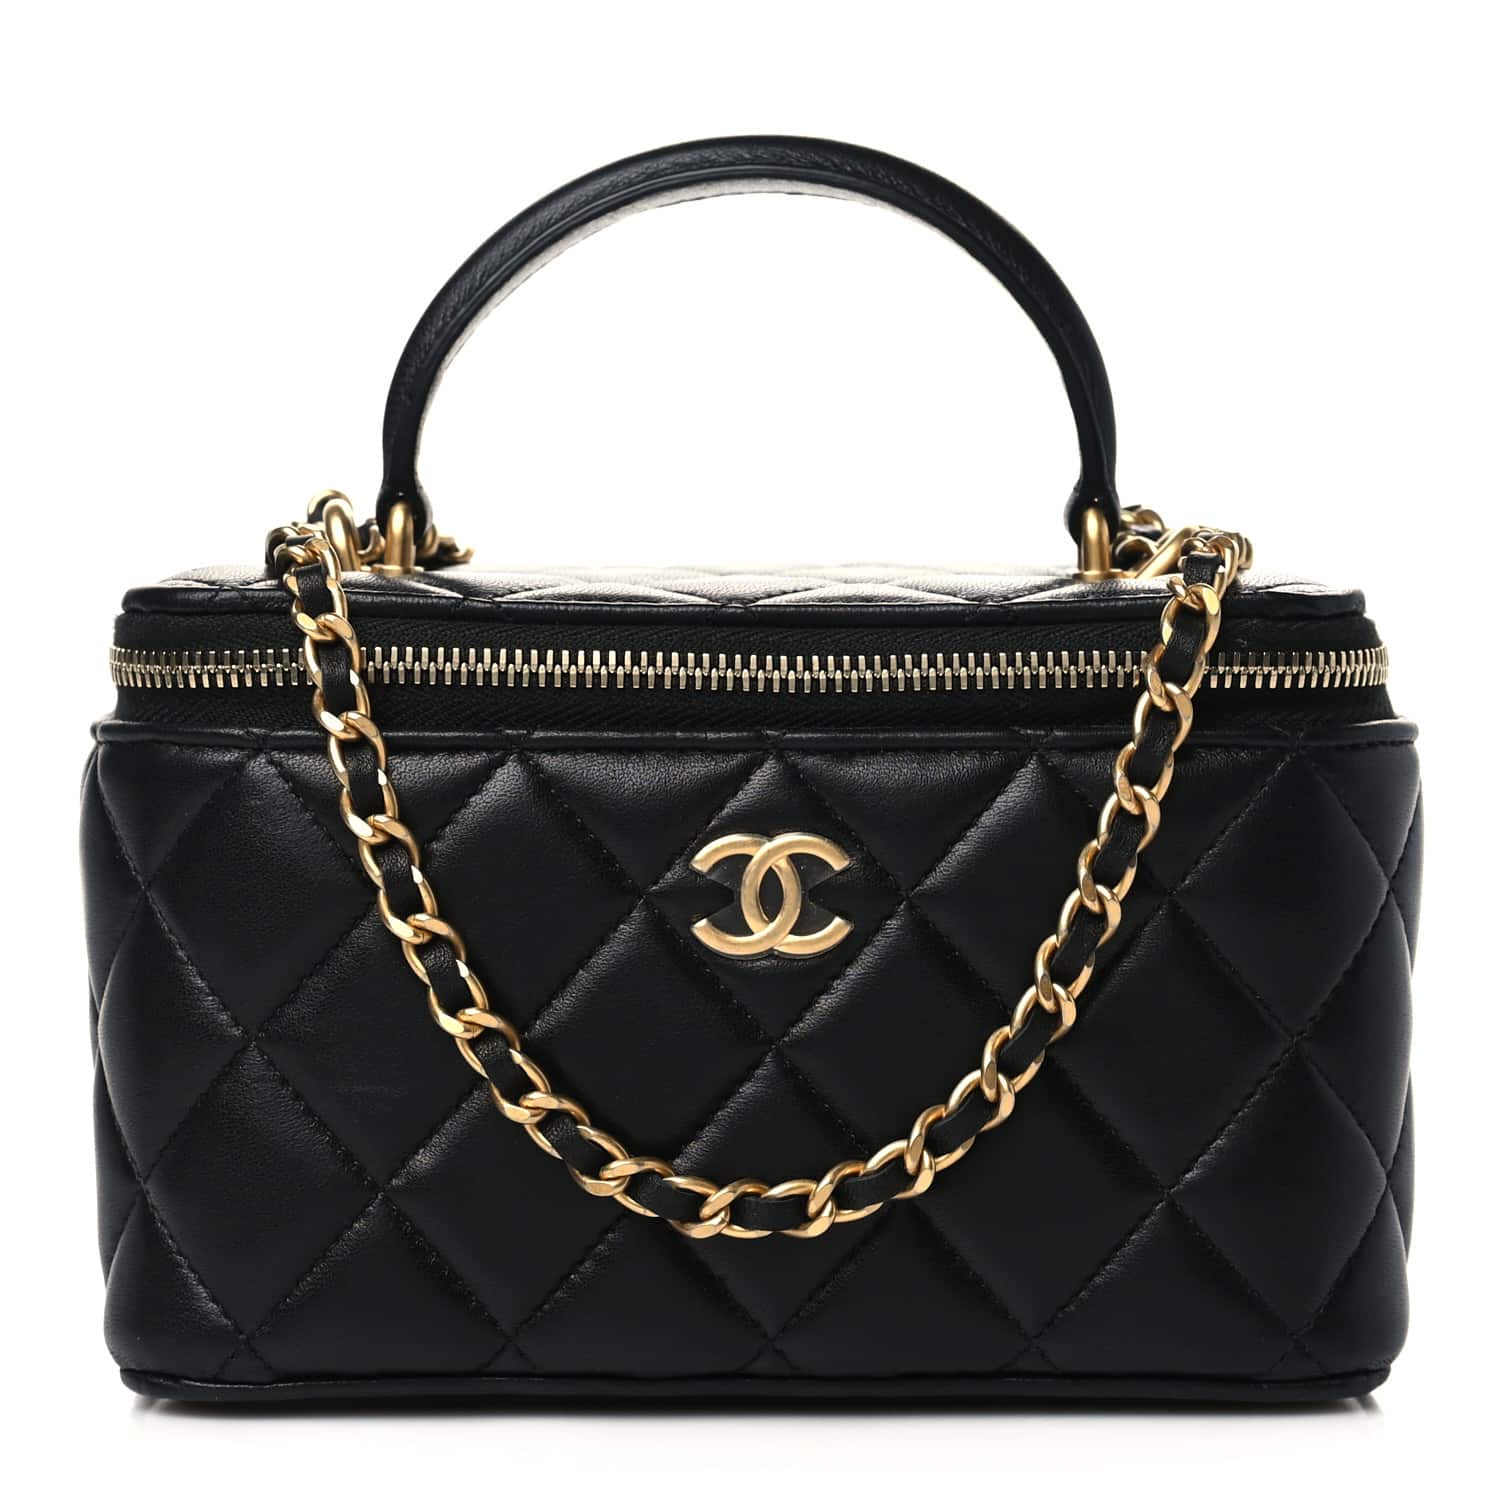 The Chanel Vanity Case, An Era's Most Coveted Design